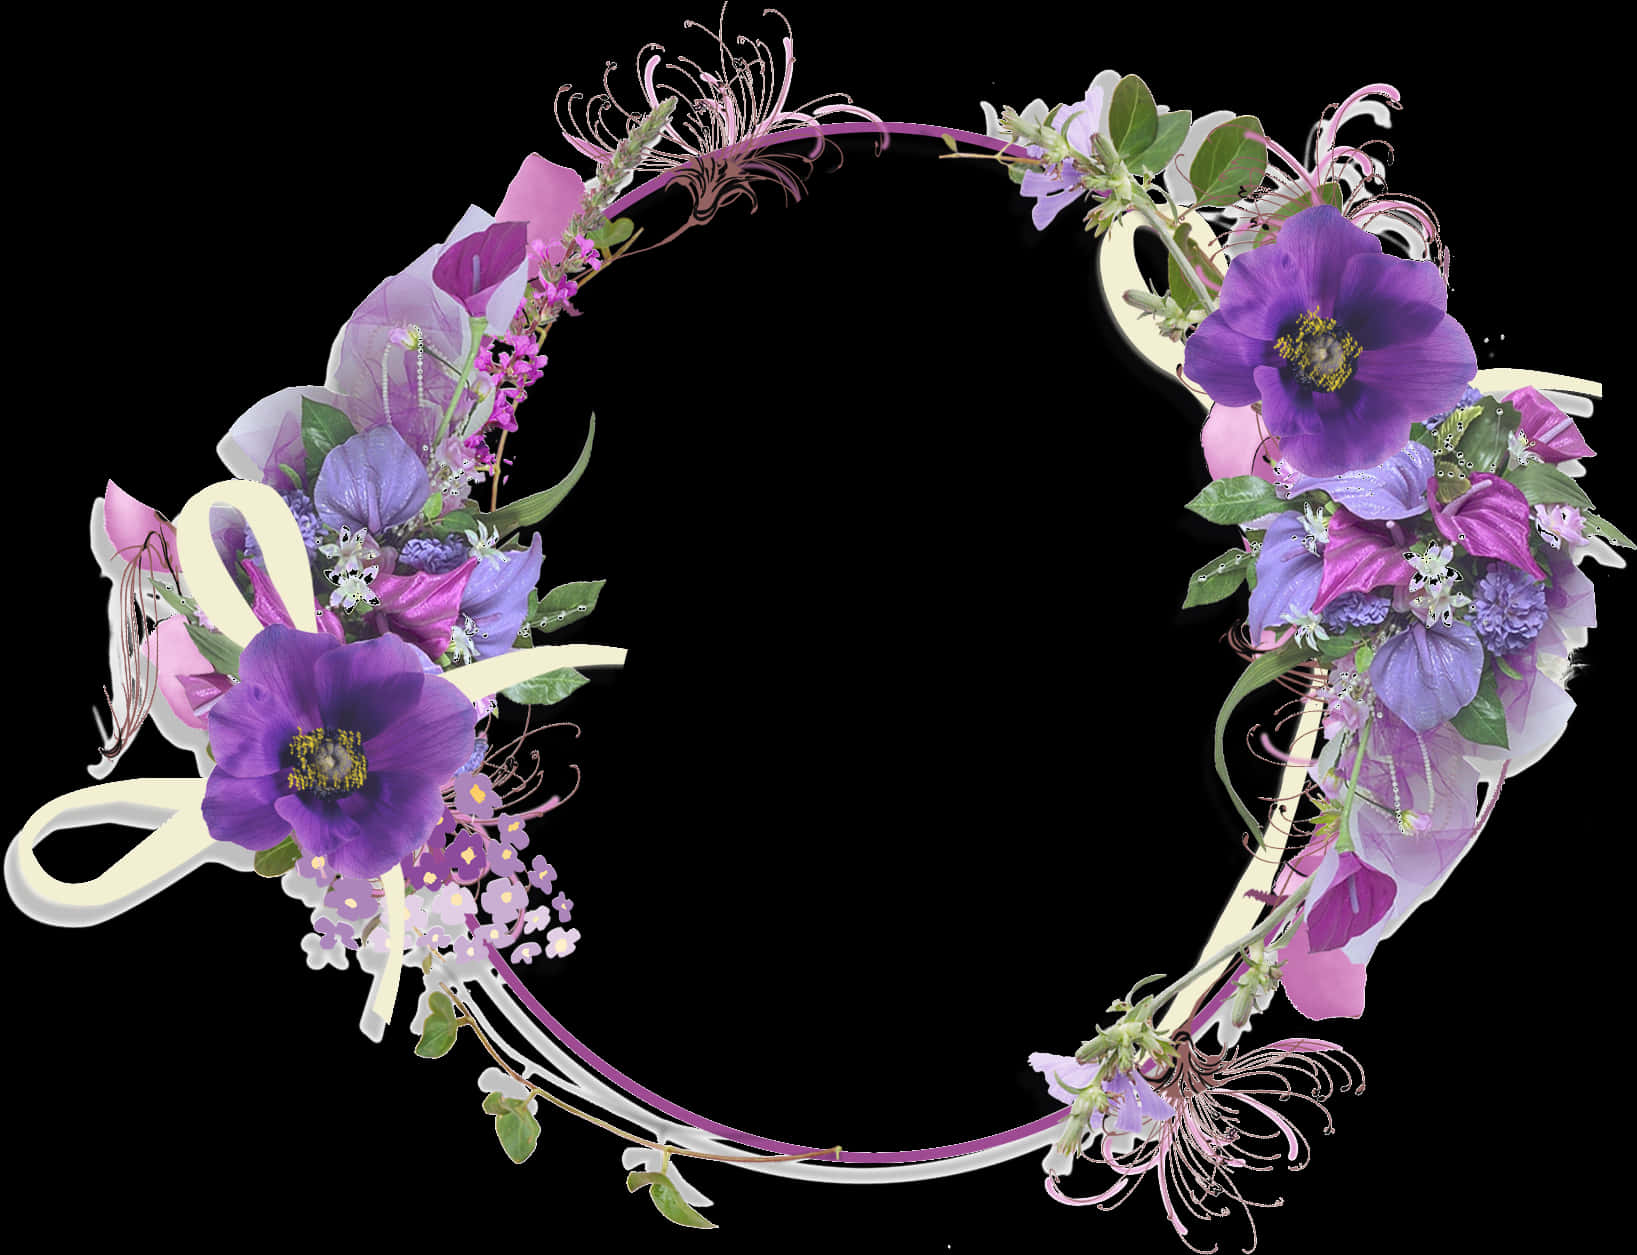 A Purple And White Floral Frame